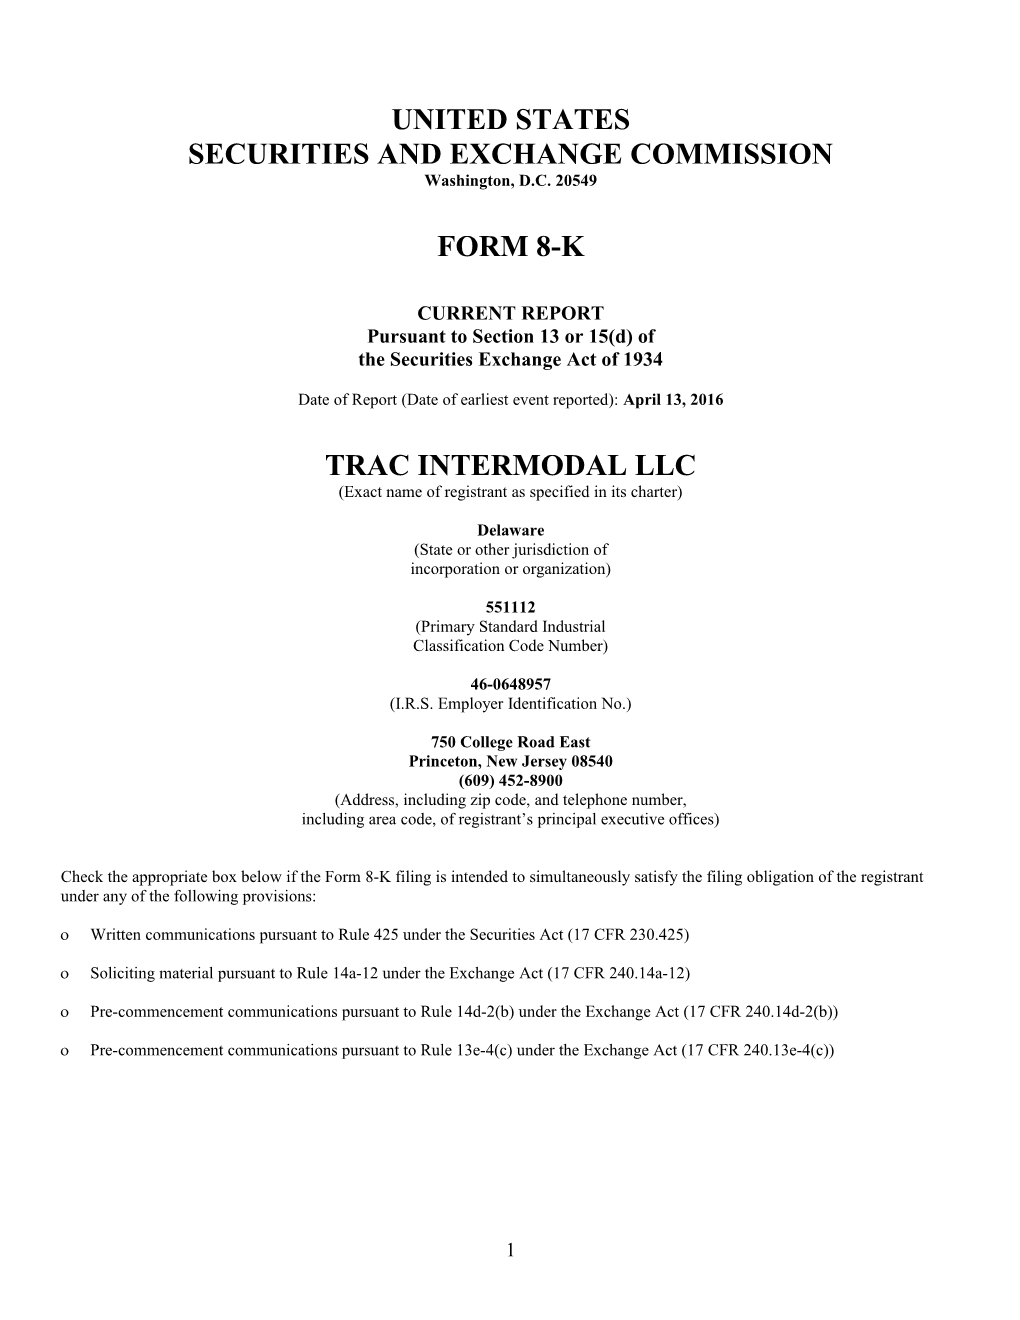 Securities and Exchange Commission s6